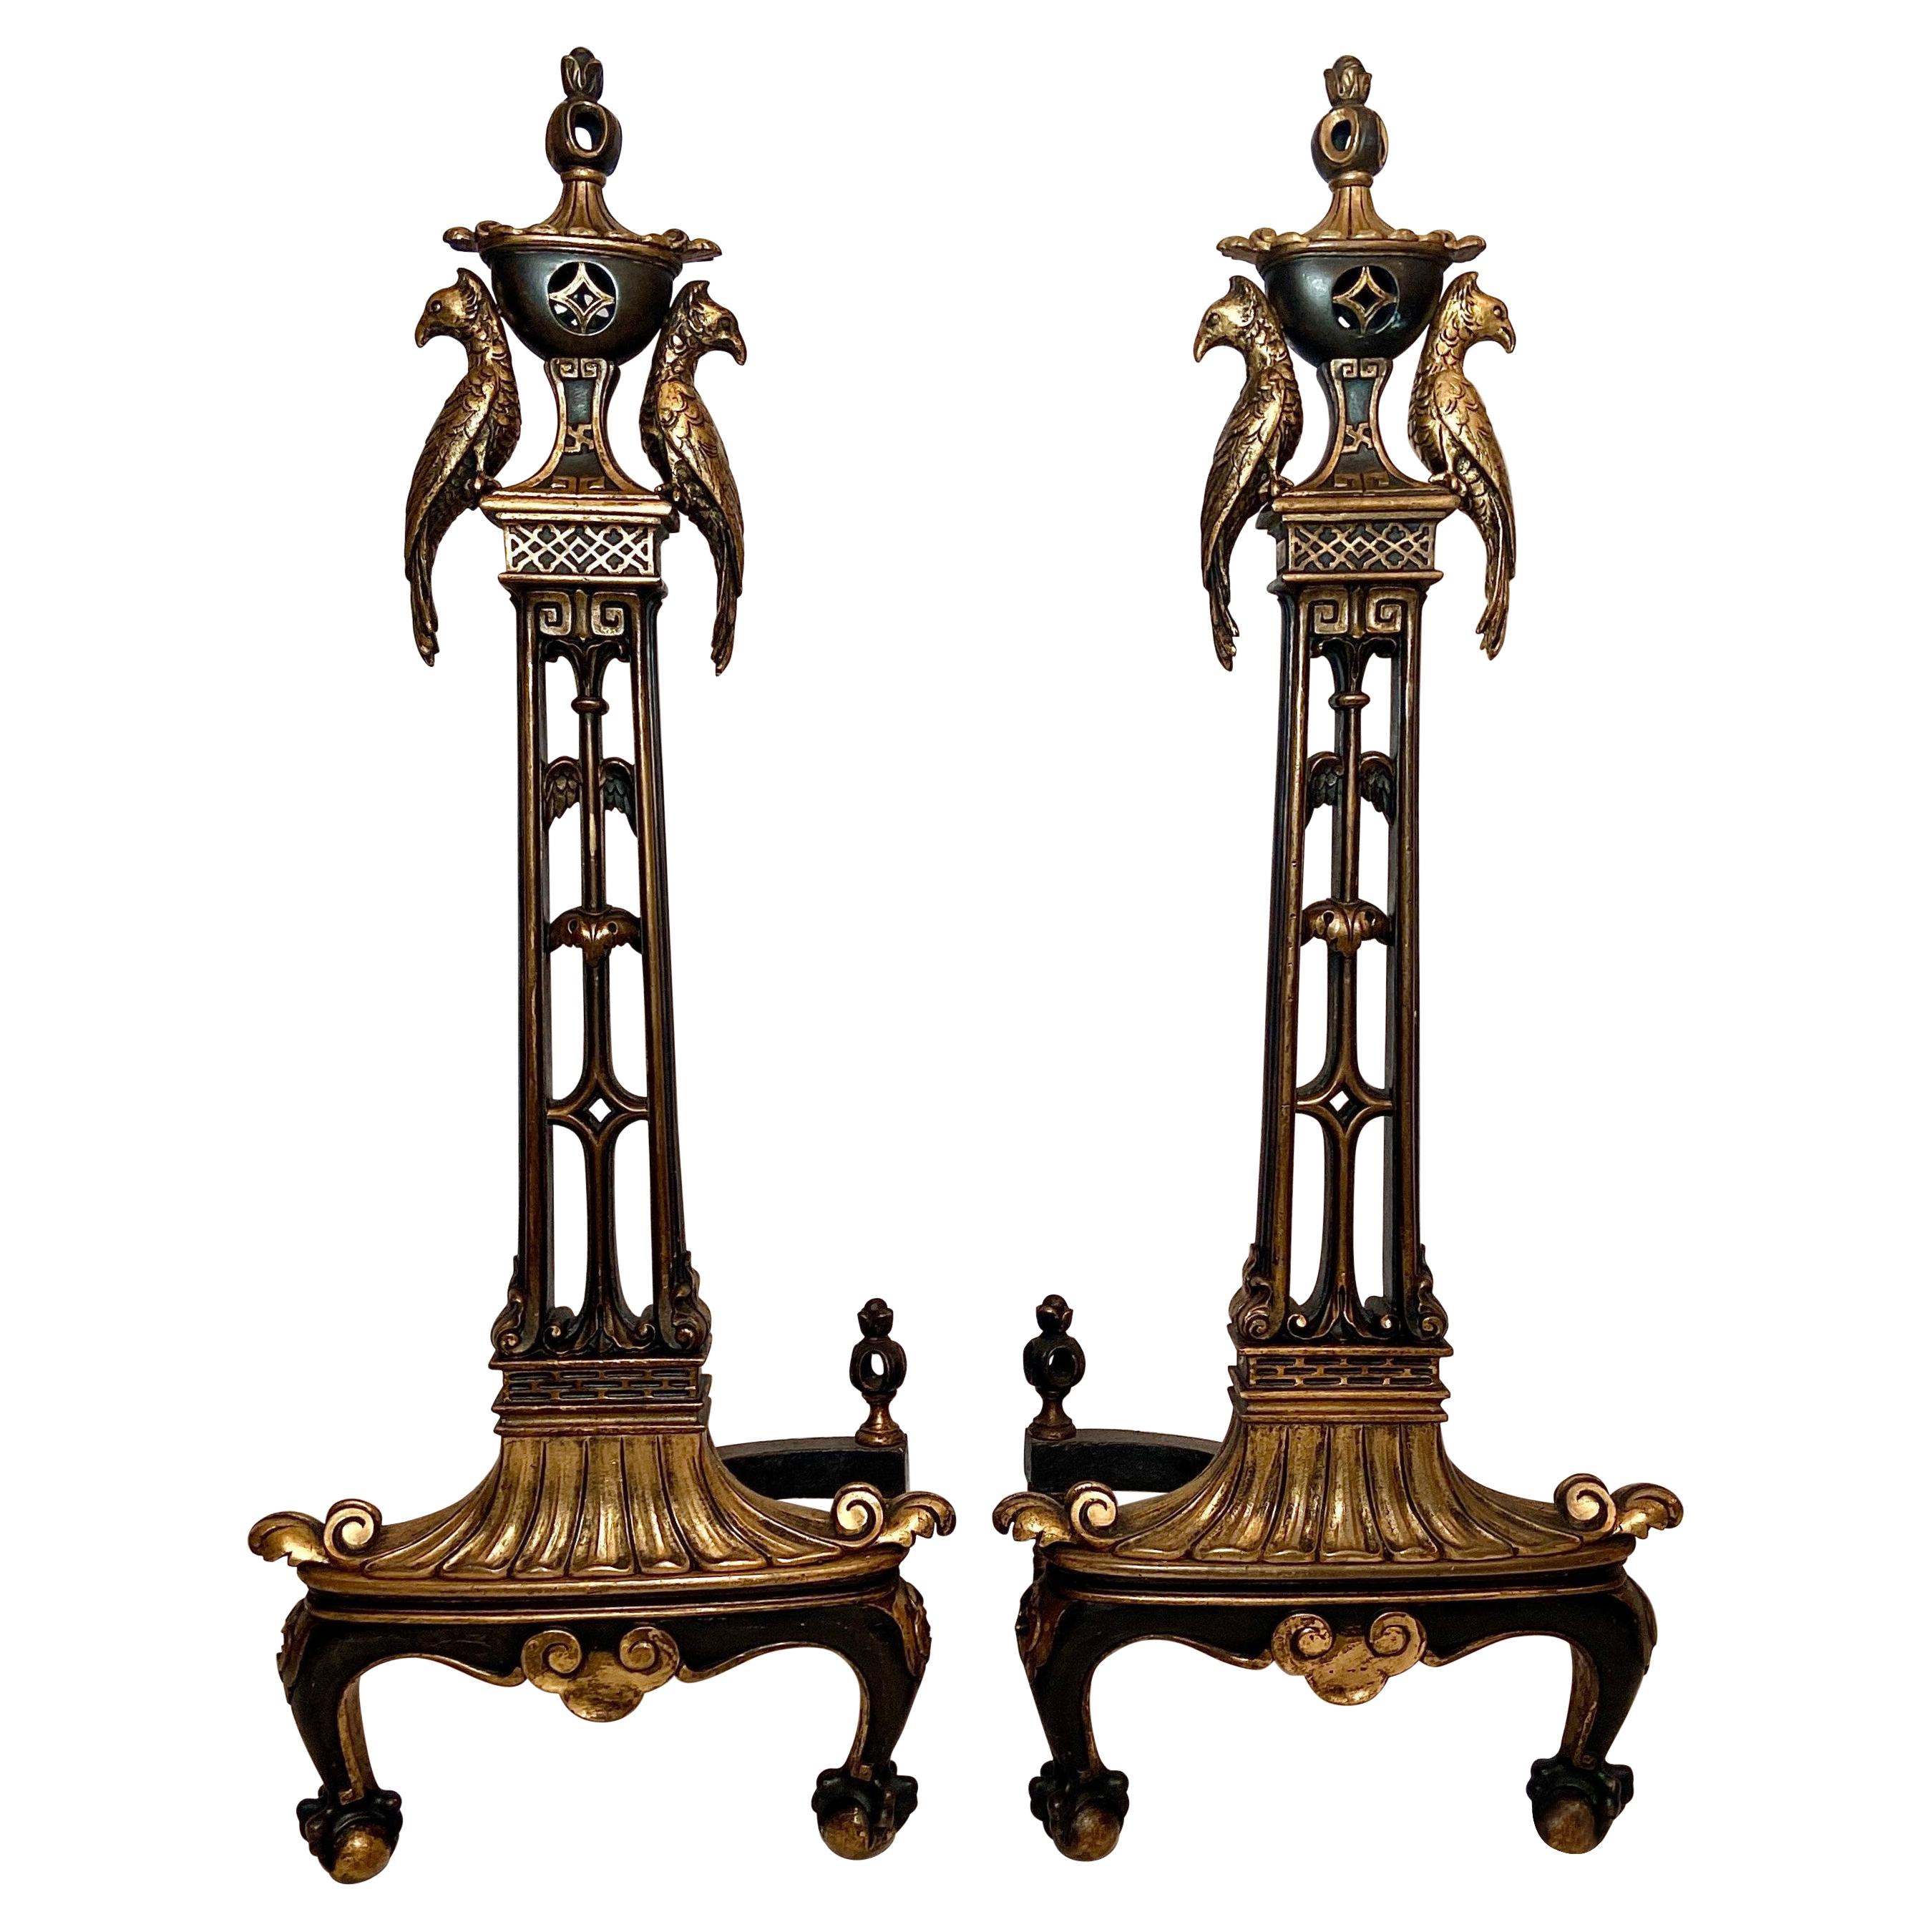 Pair Antique American Art Nouveau Bronze Andirons by Caldwell & Co N.Y., Ca 1910 For Sale